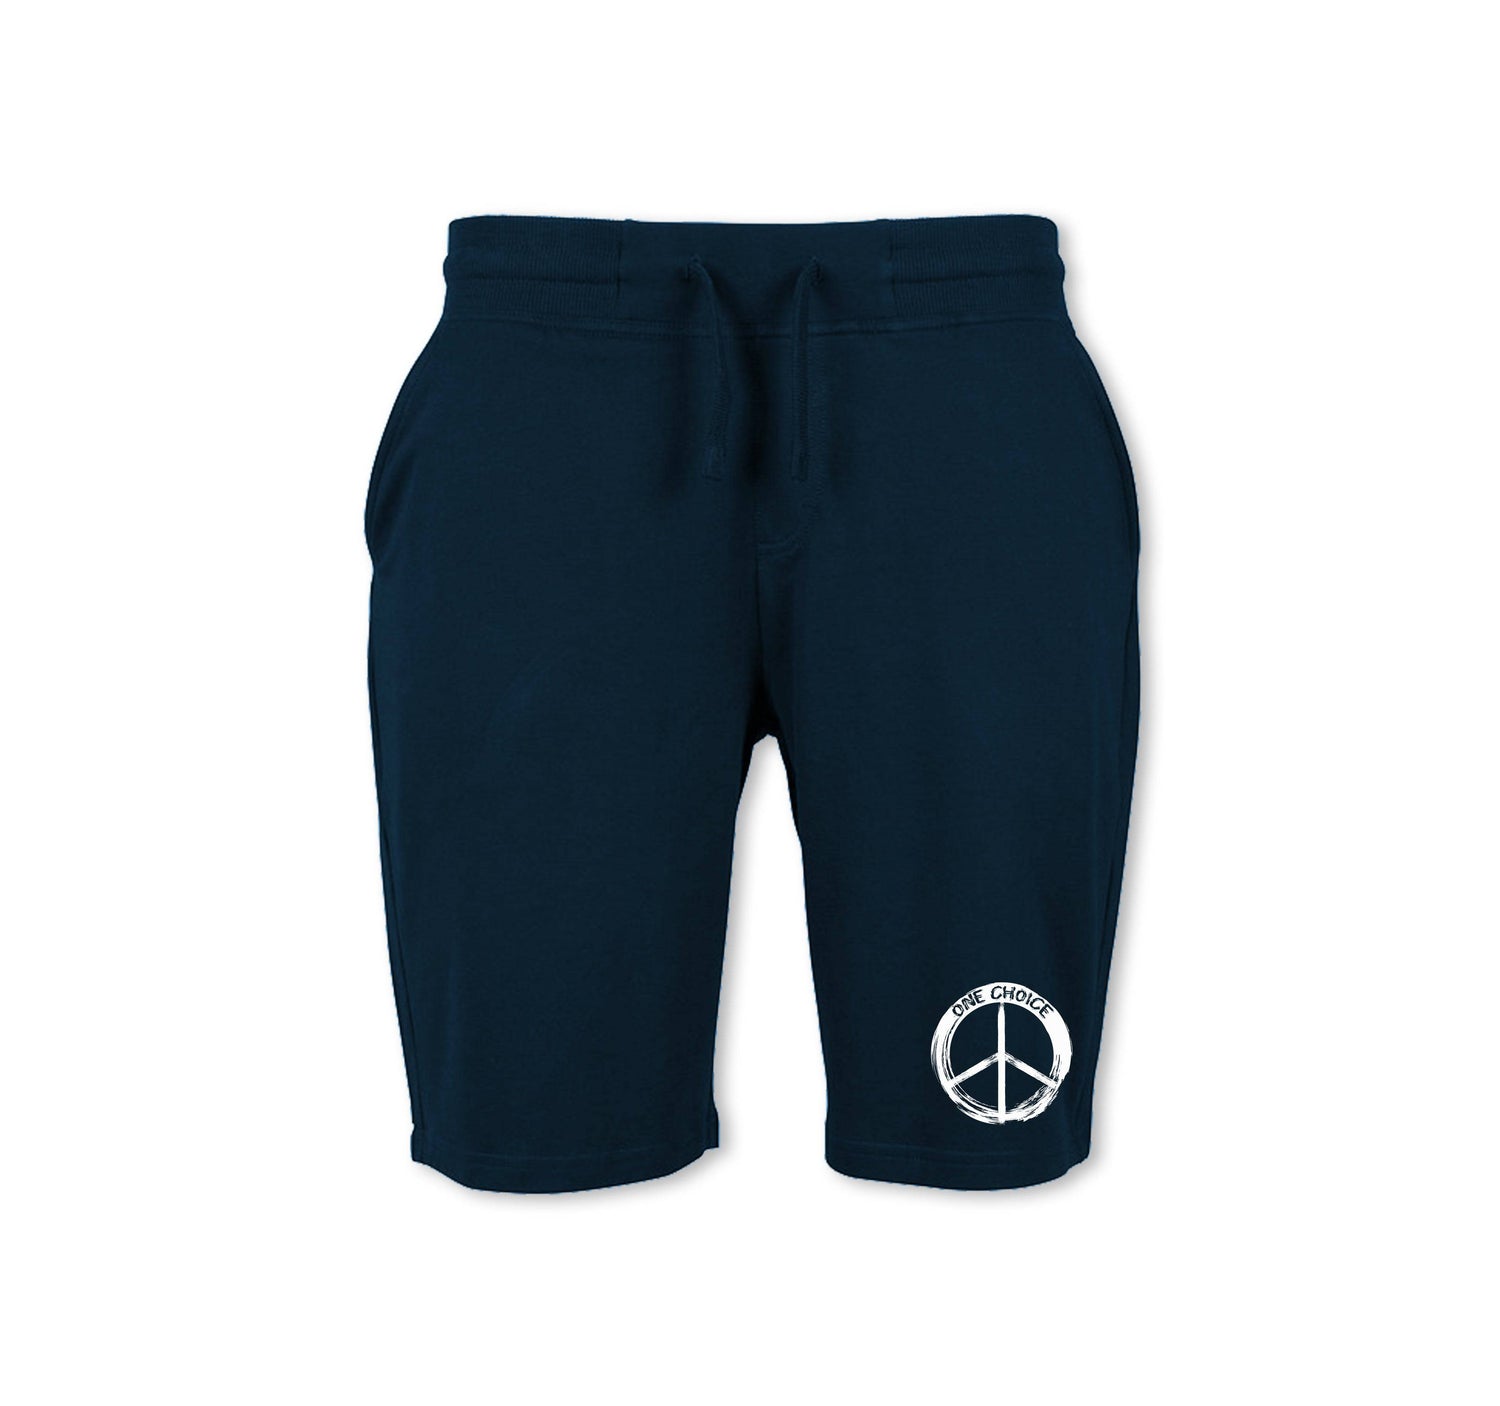 Round Peace Sign Shorts - Organic Cotton - One Choice Apparel